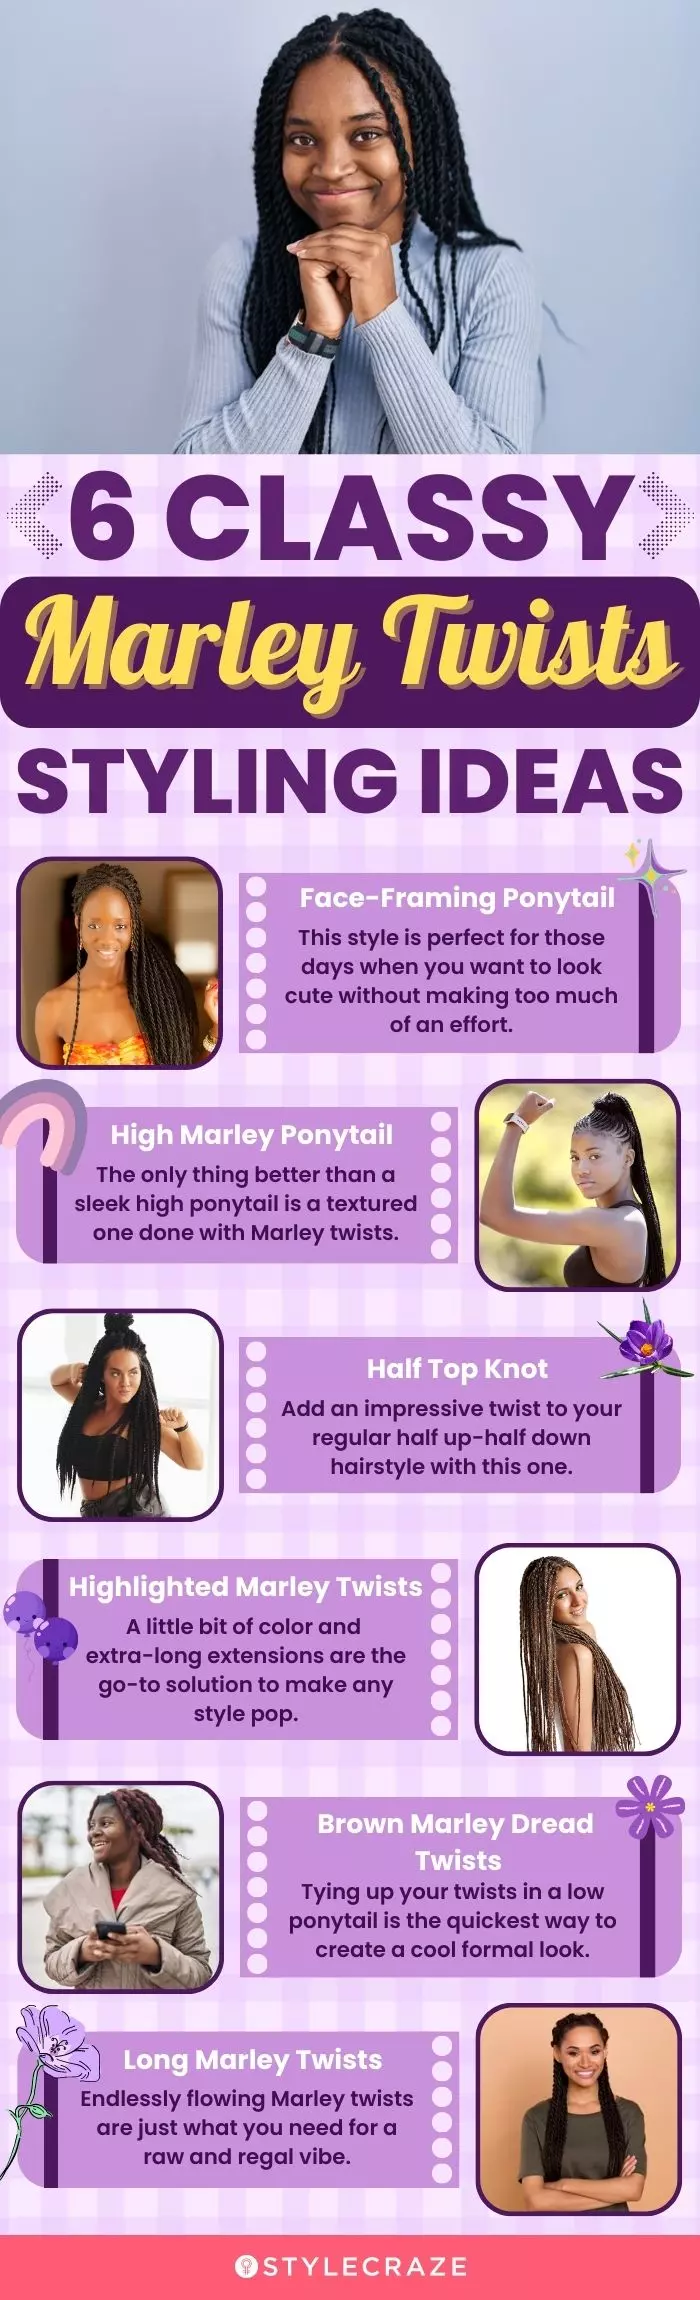 6 classy marley twists styling ideas (infographic)